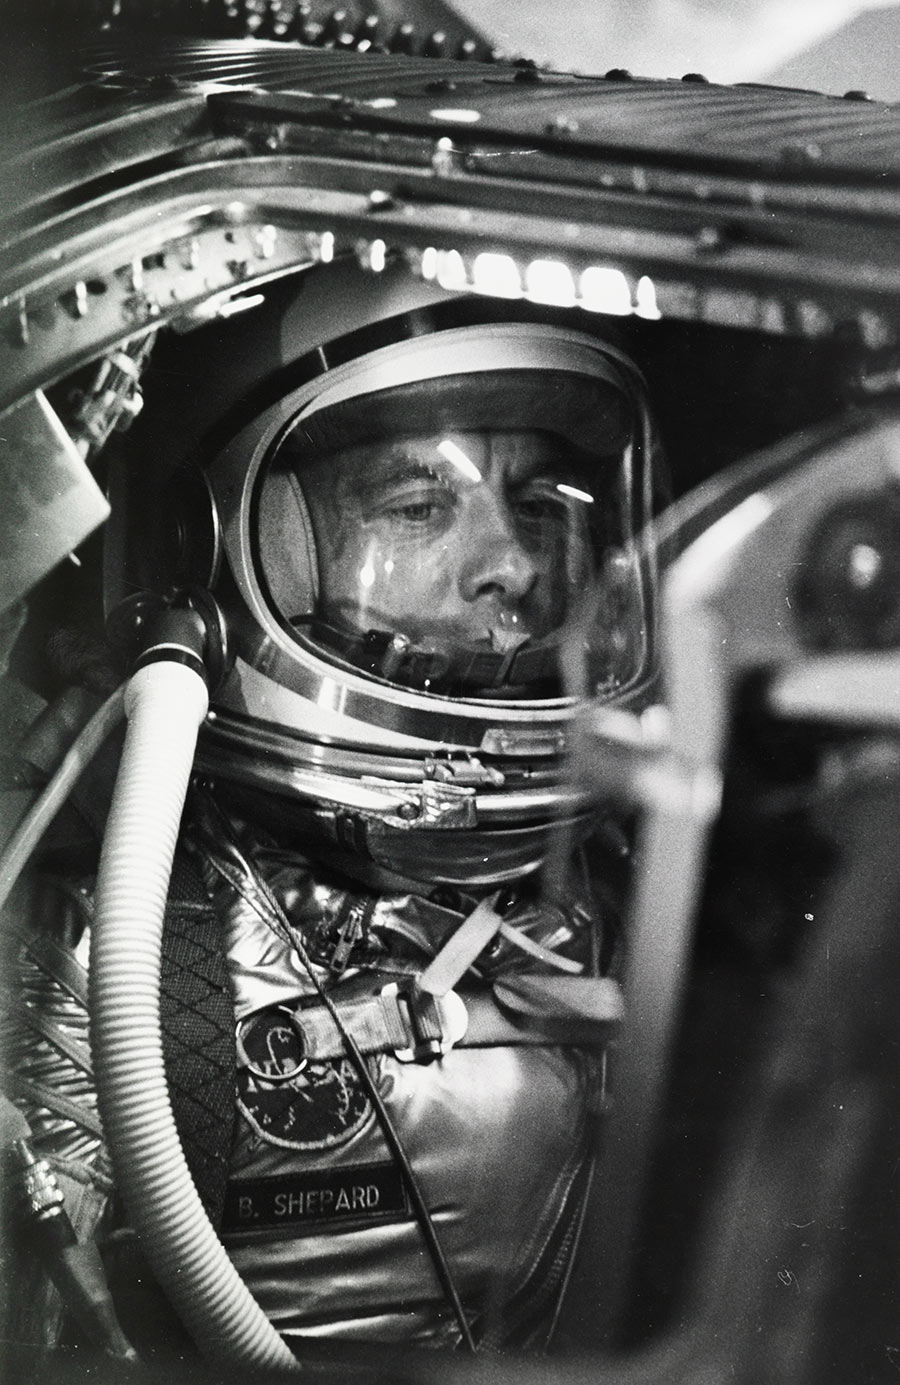 Alan Shepard waits to become the first American in space, Cape Canaveral, 1961. Photograph by NASA